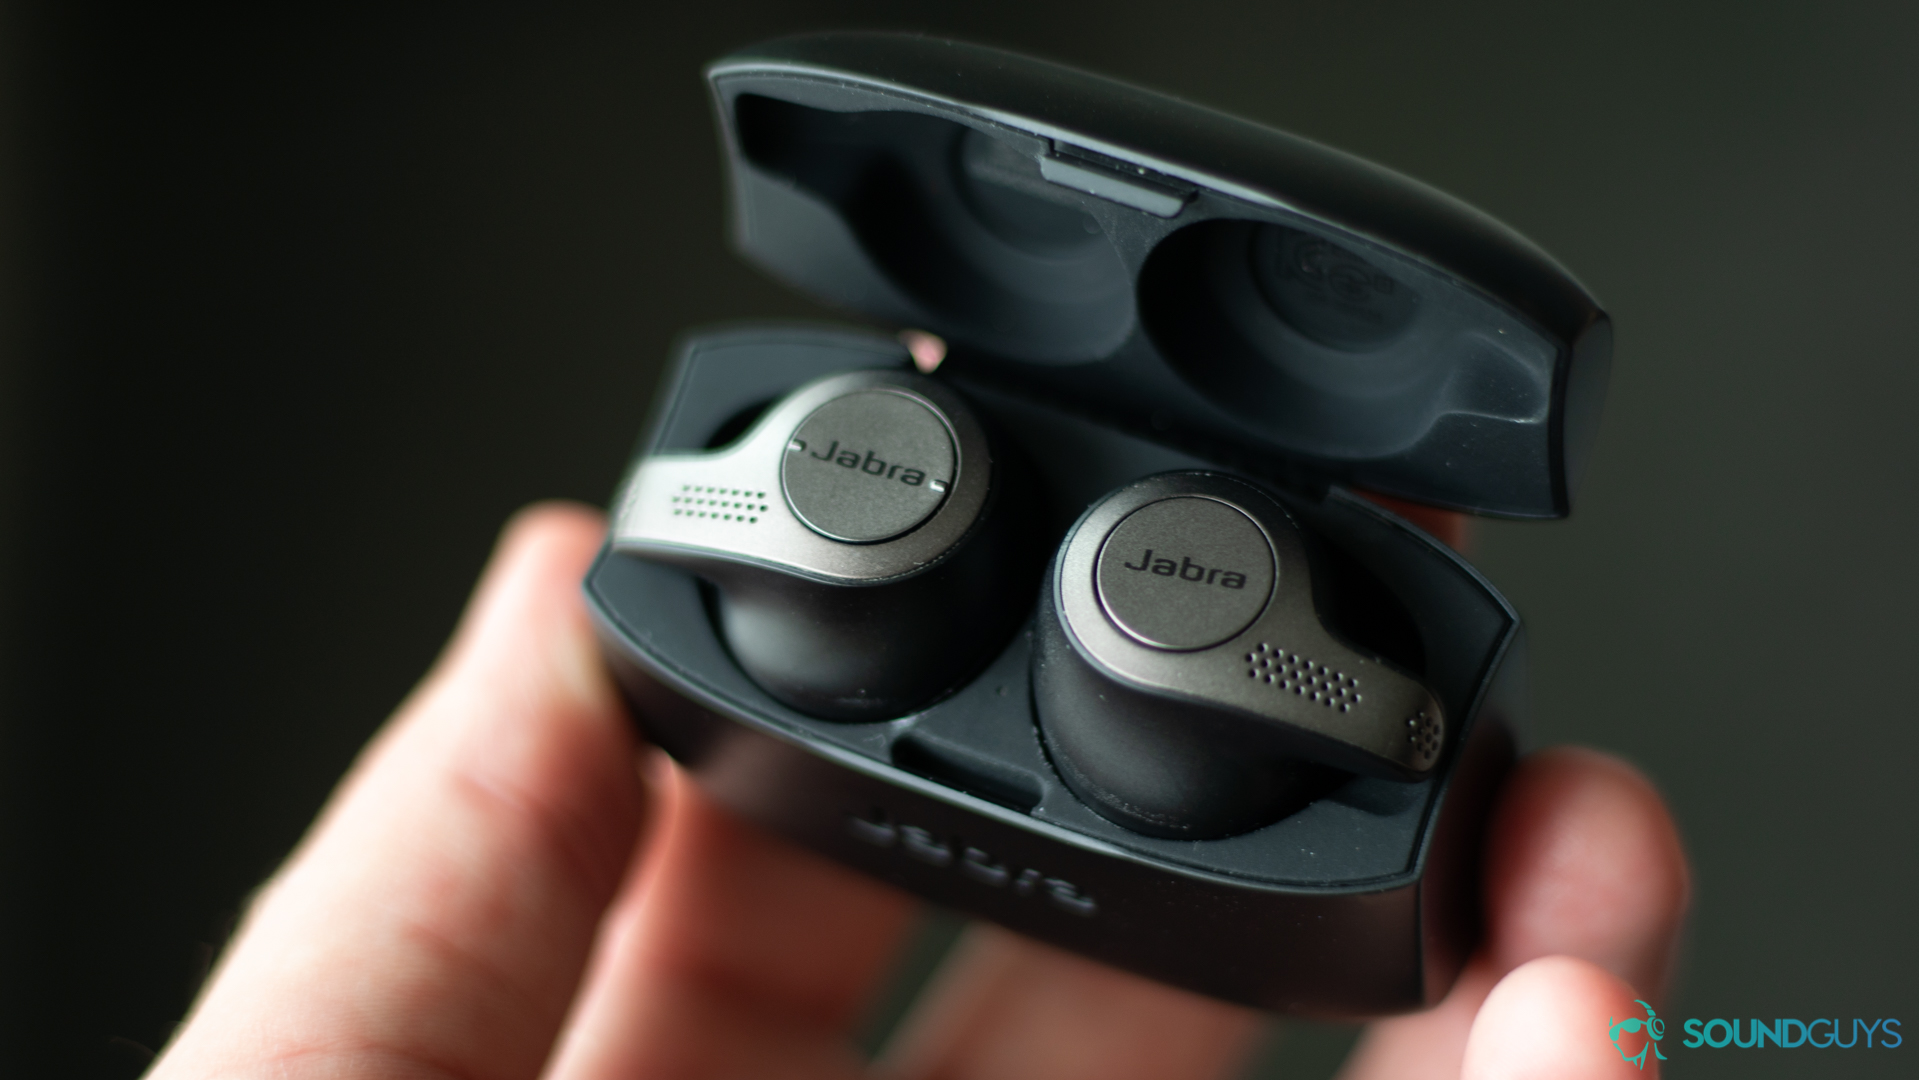 The Jabra Elite 65t in Adam Molina's hand. He holds the carrying case that the earbuds are resting in.